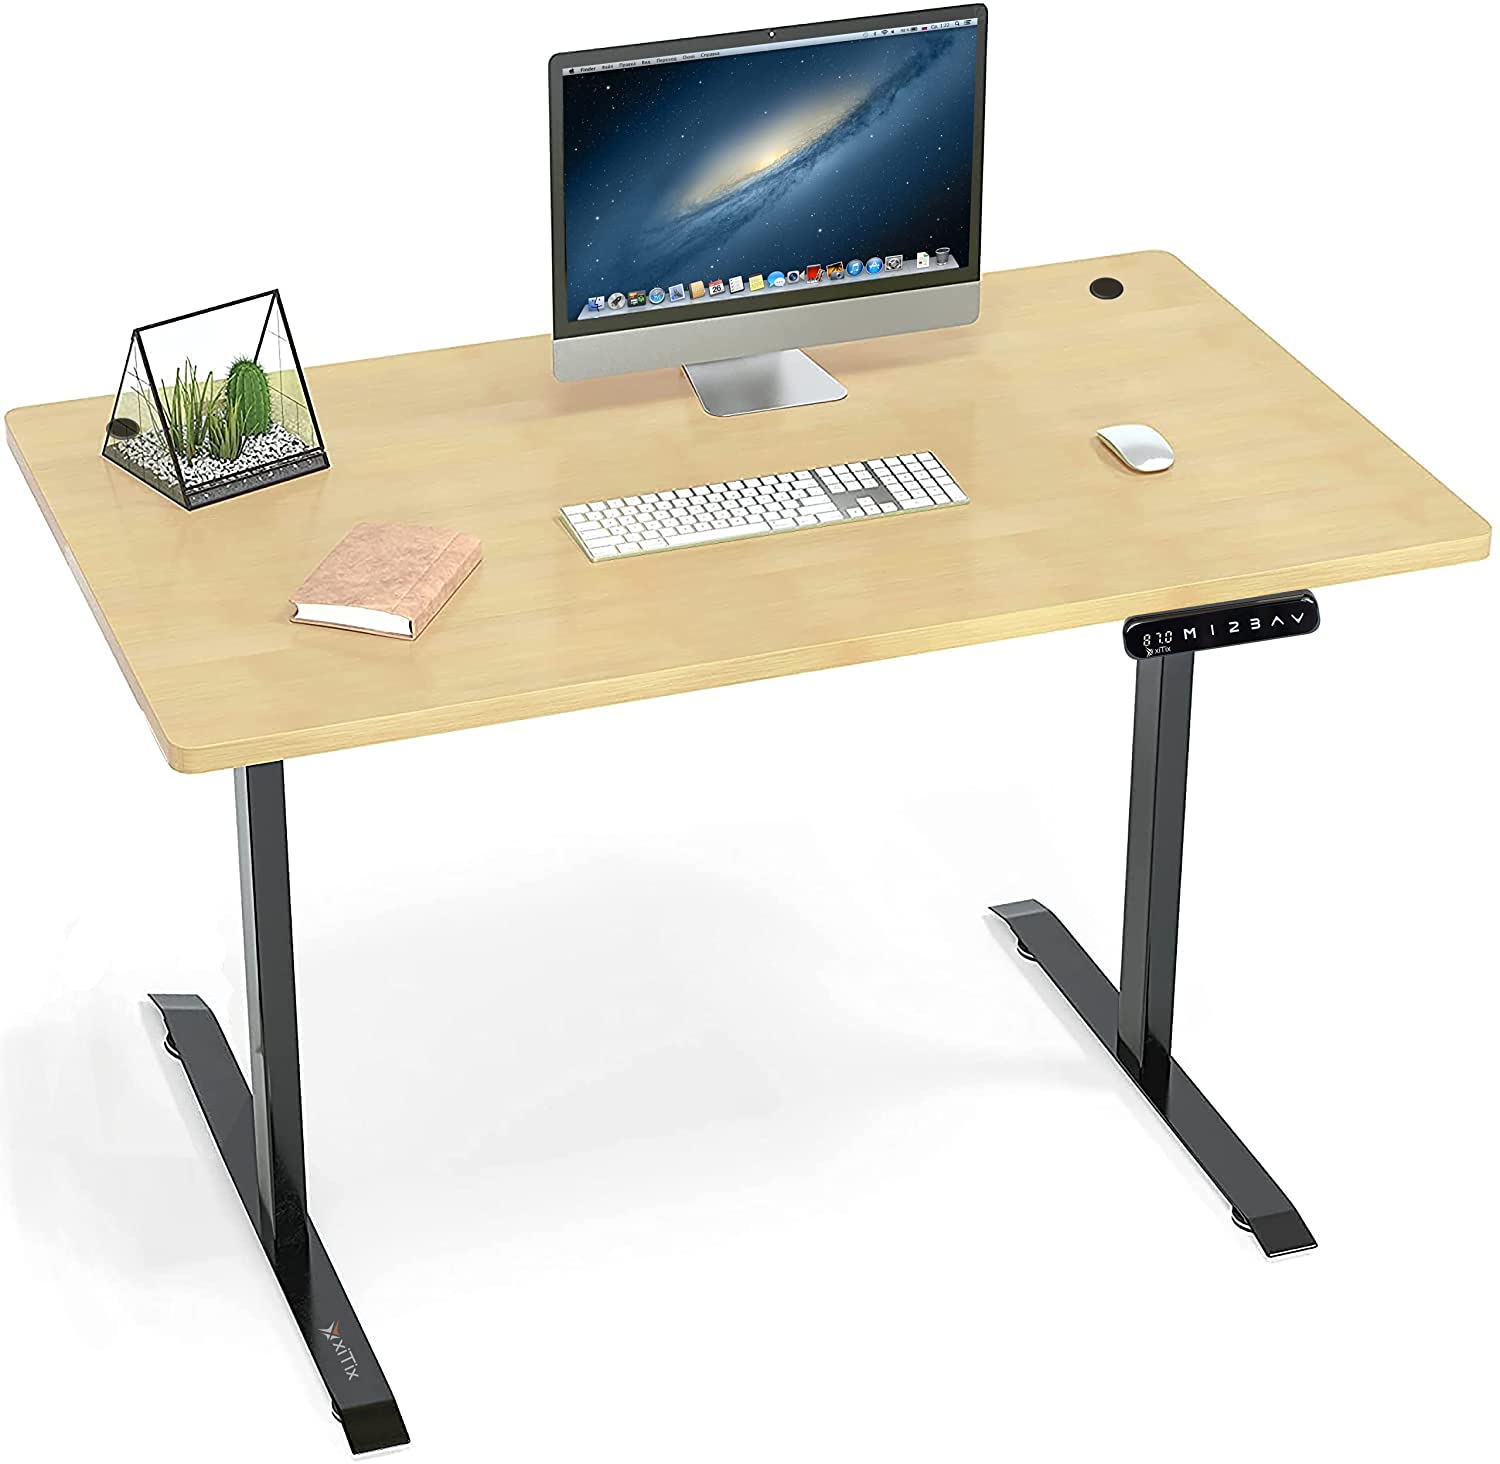 XiTix Ergonomic Height Adjustable Computer Table Electric work desk Work Station With Electronic Motorized Controller Automatic Electric Single Motor, Light Wood Top 600 X 1200 X 18mm Thickness, 100KG Load Capacity